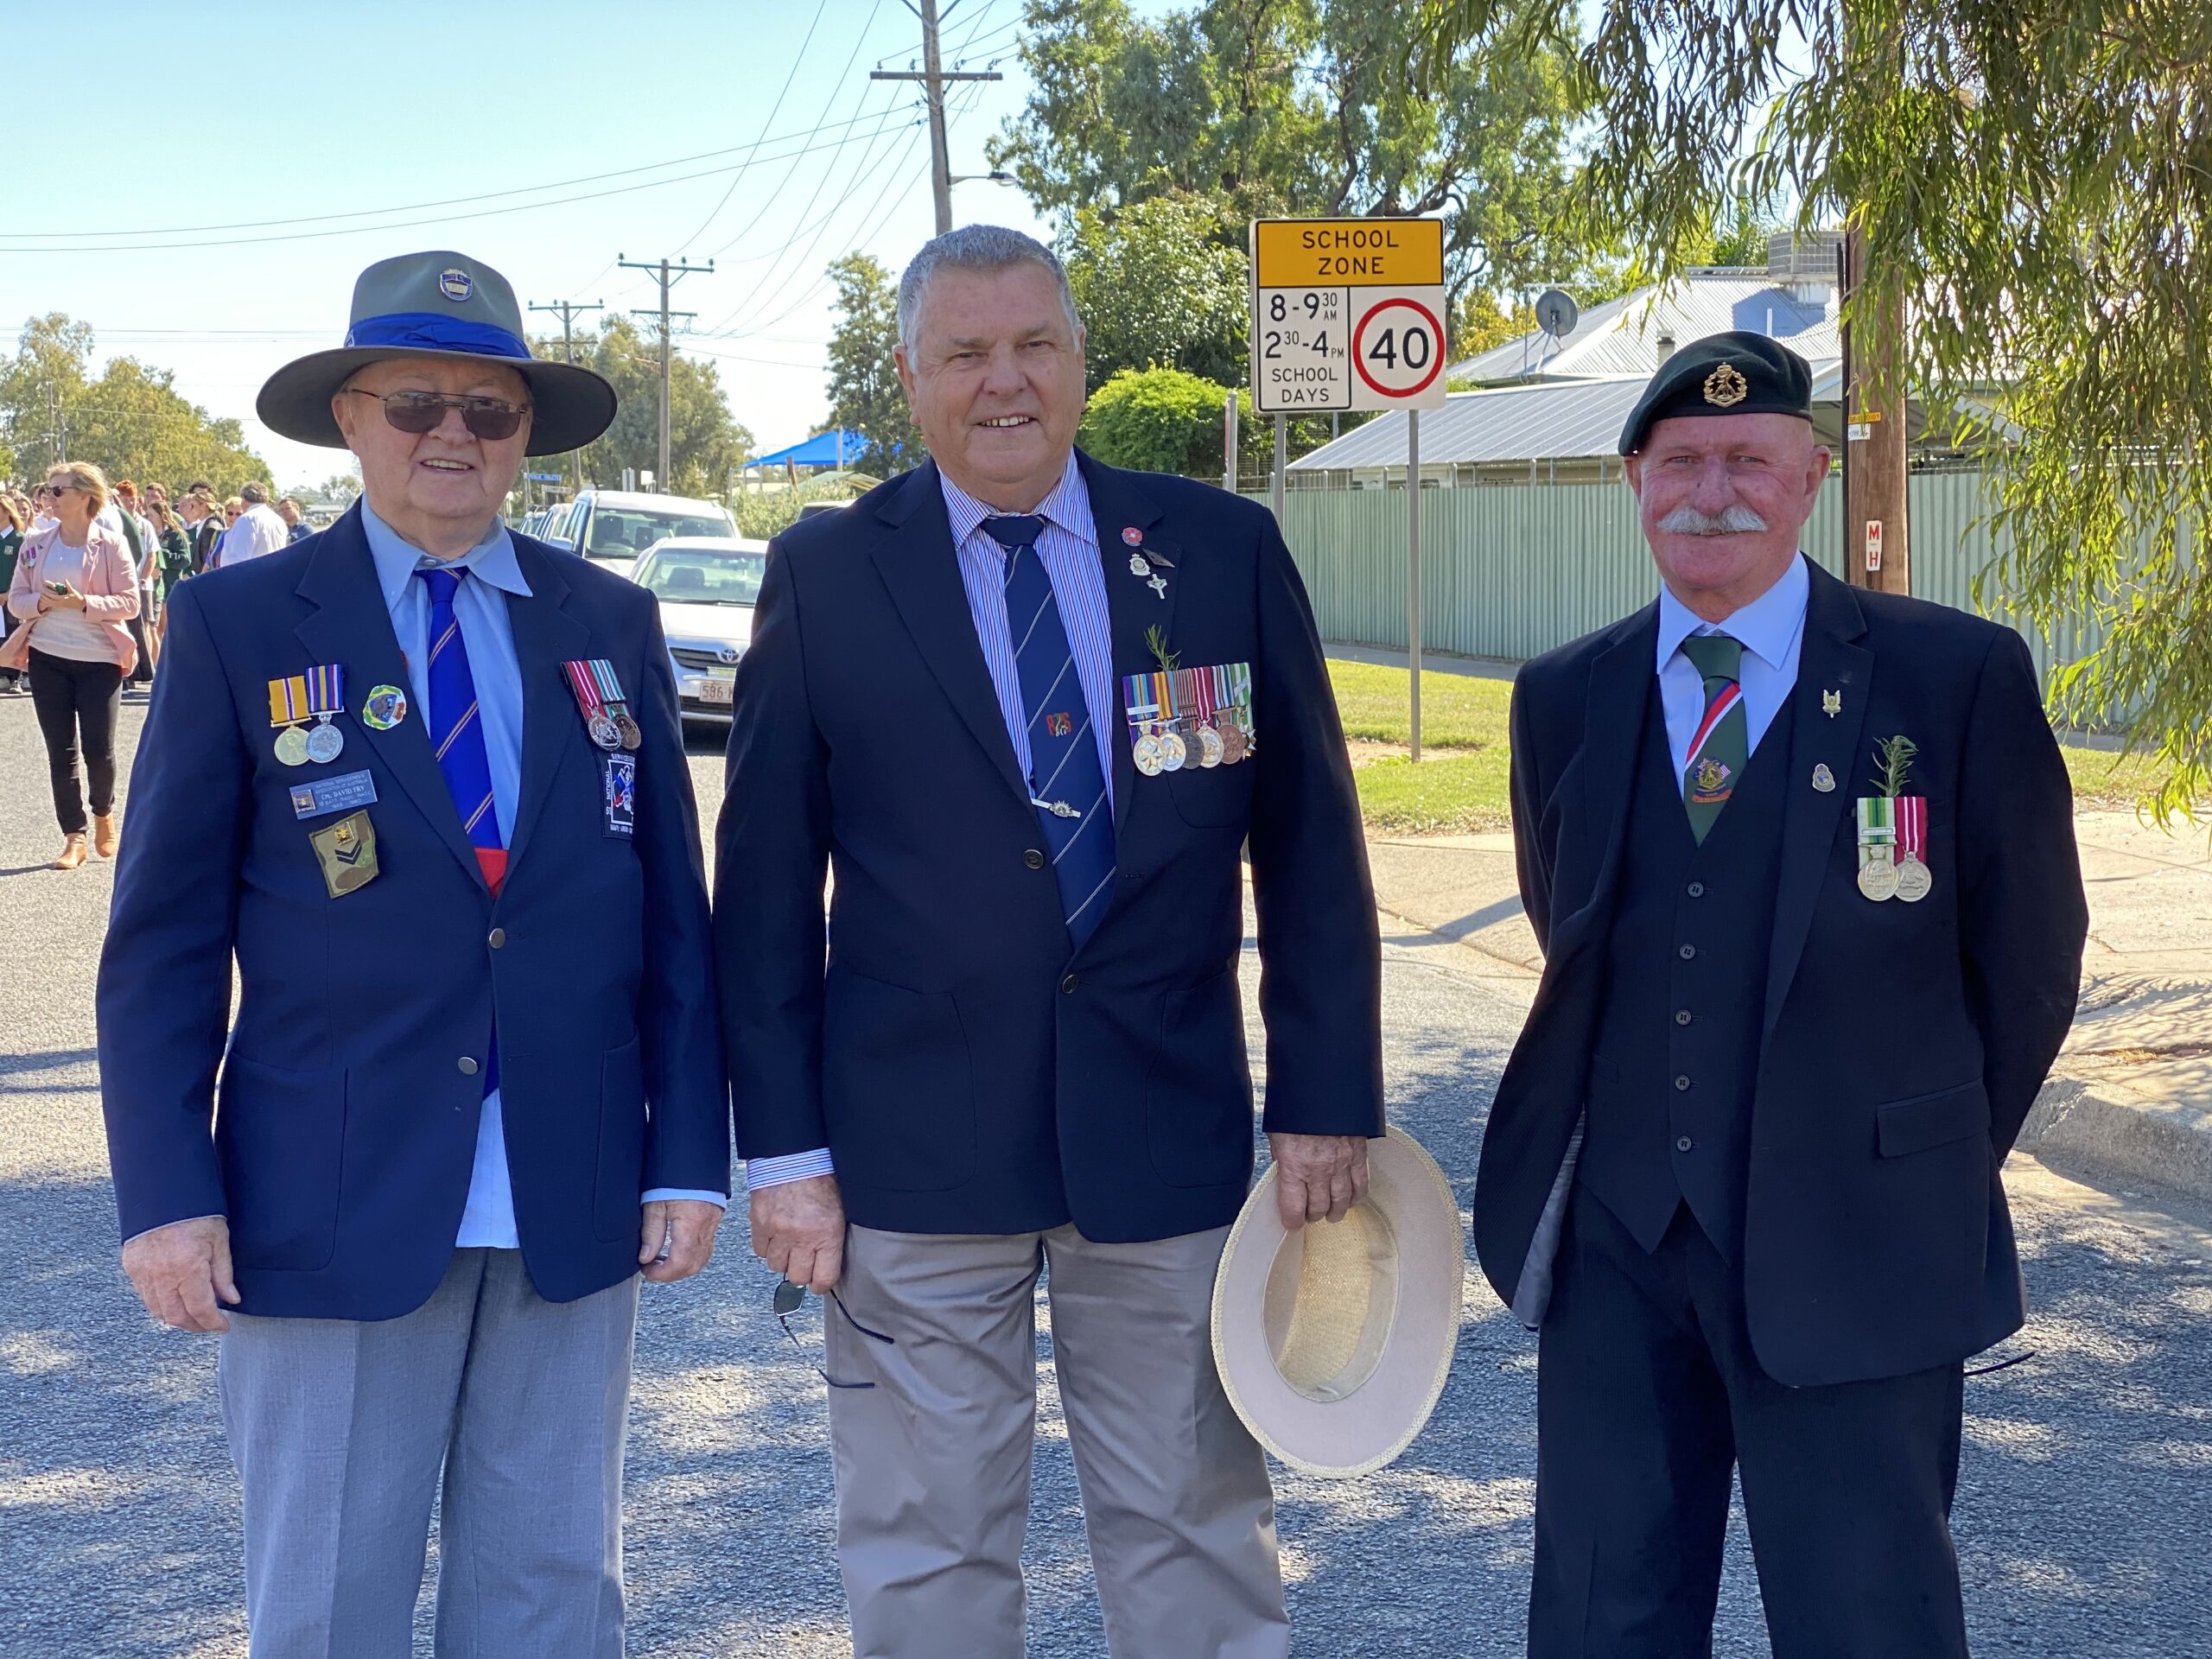 Ex-servicemen at the Wee Waa commemoration, David Fry, Dennis Lowder and Leon Wager.